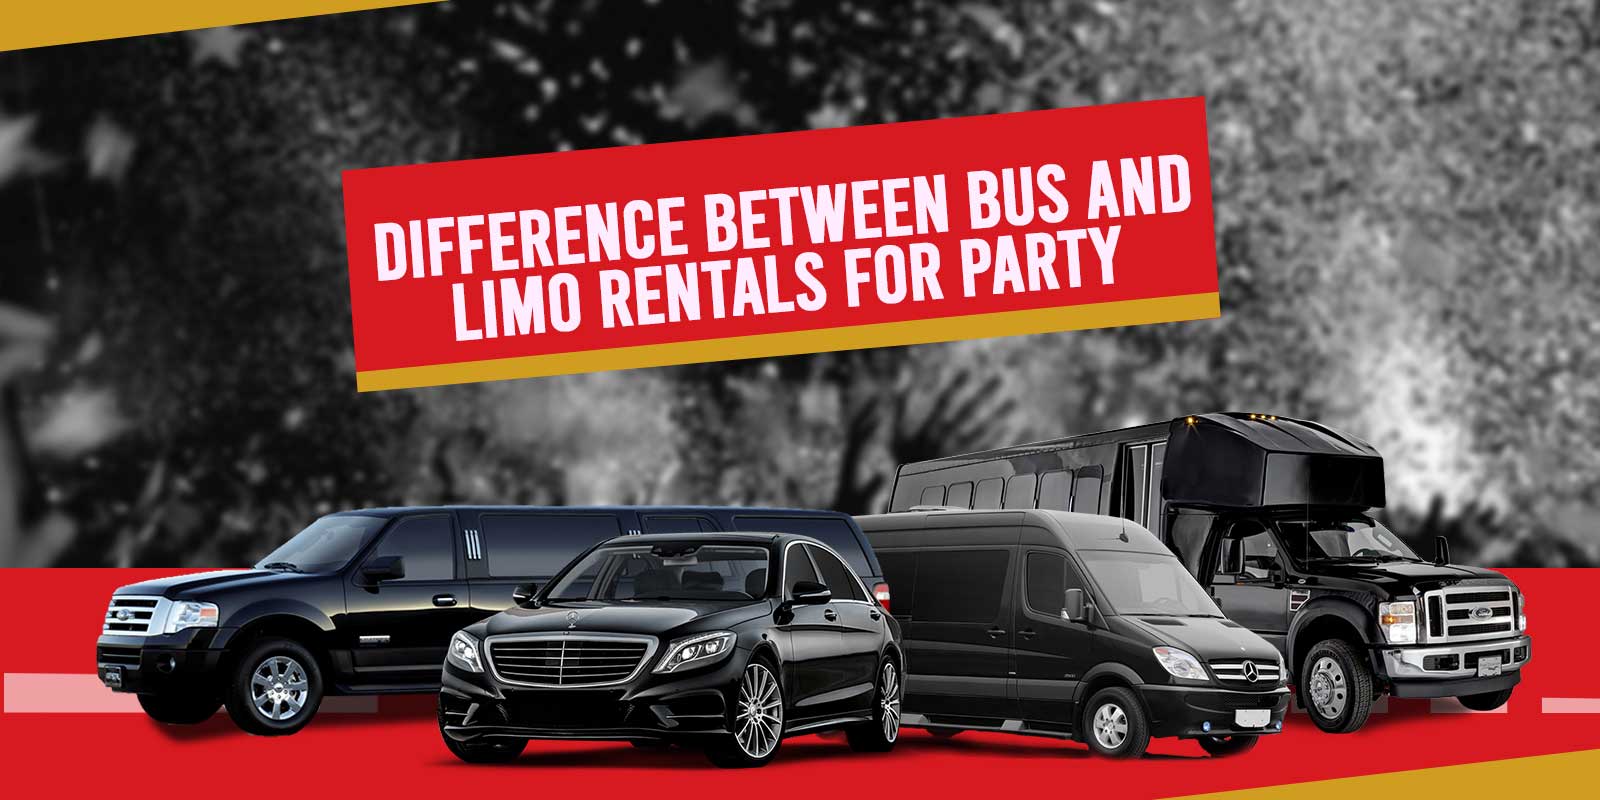 Difference Between Bus and Limo Rentals